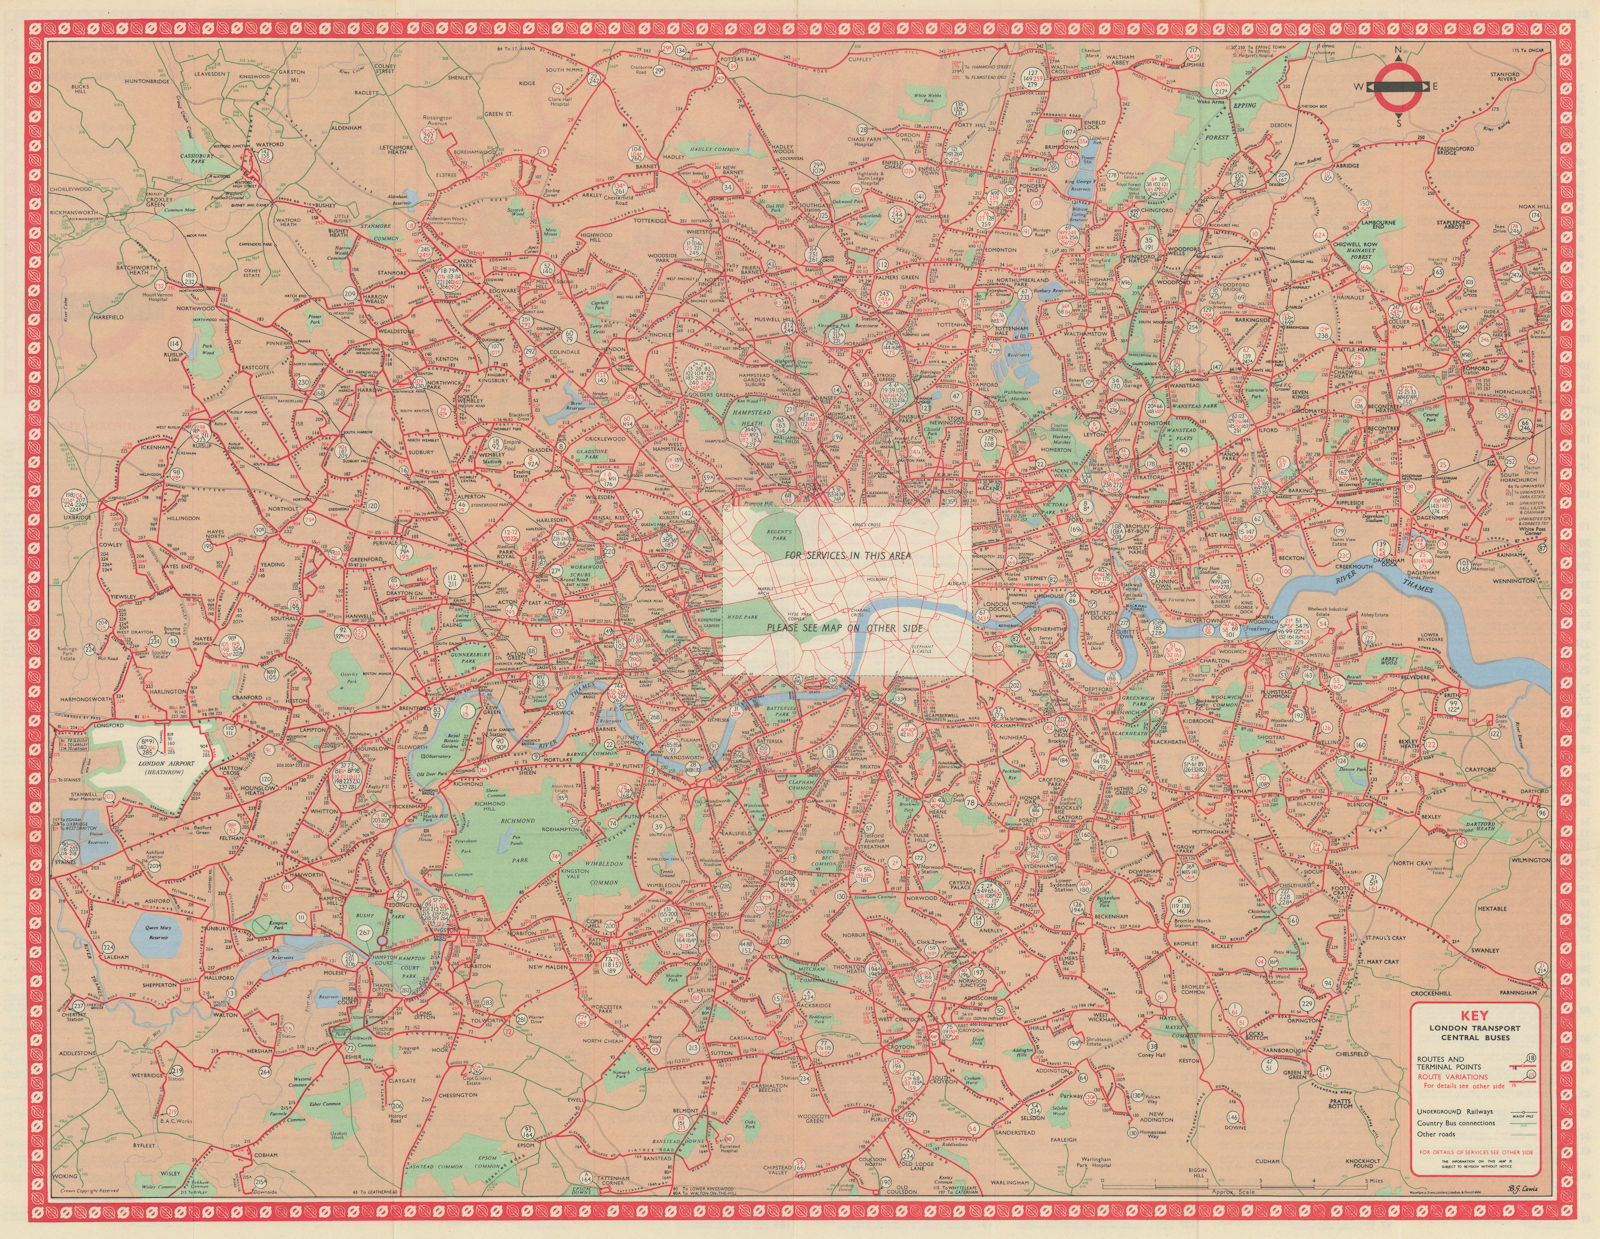 London Transport Central Buses map and list of routes. LEWIS #3 1966 old